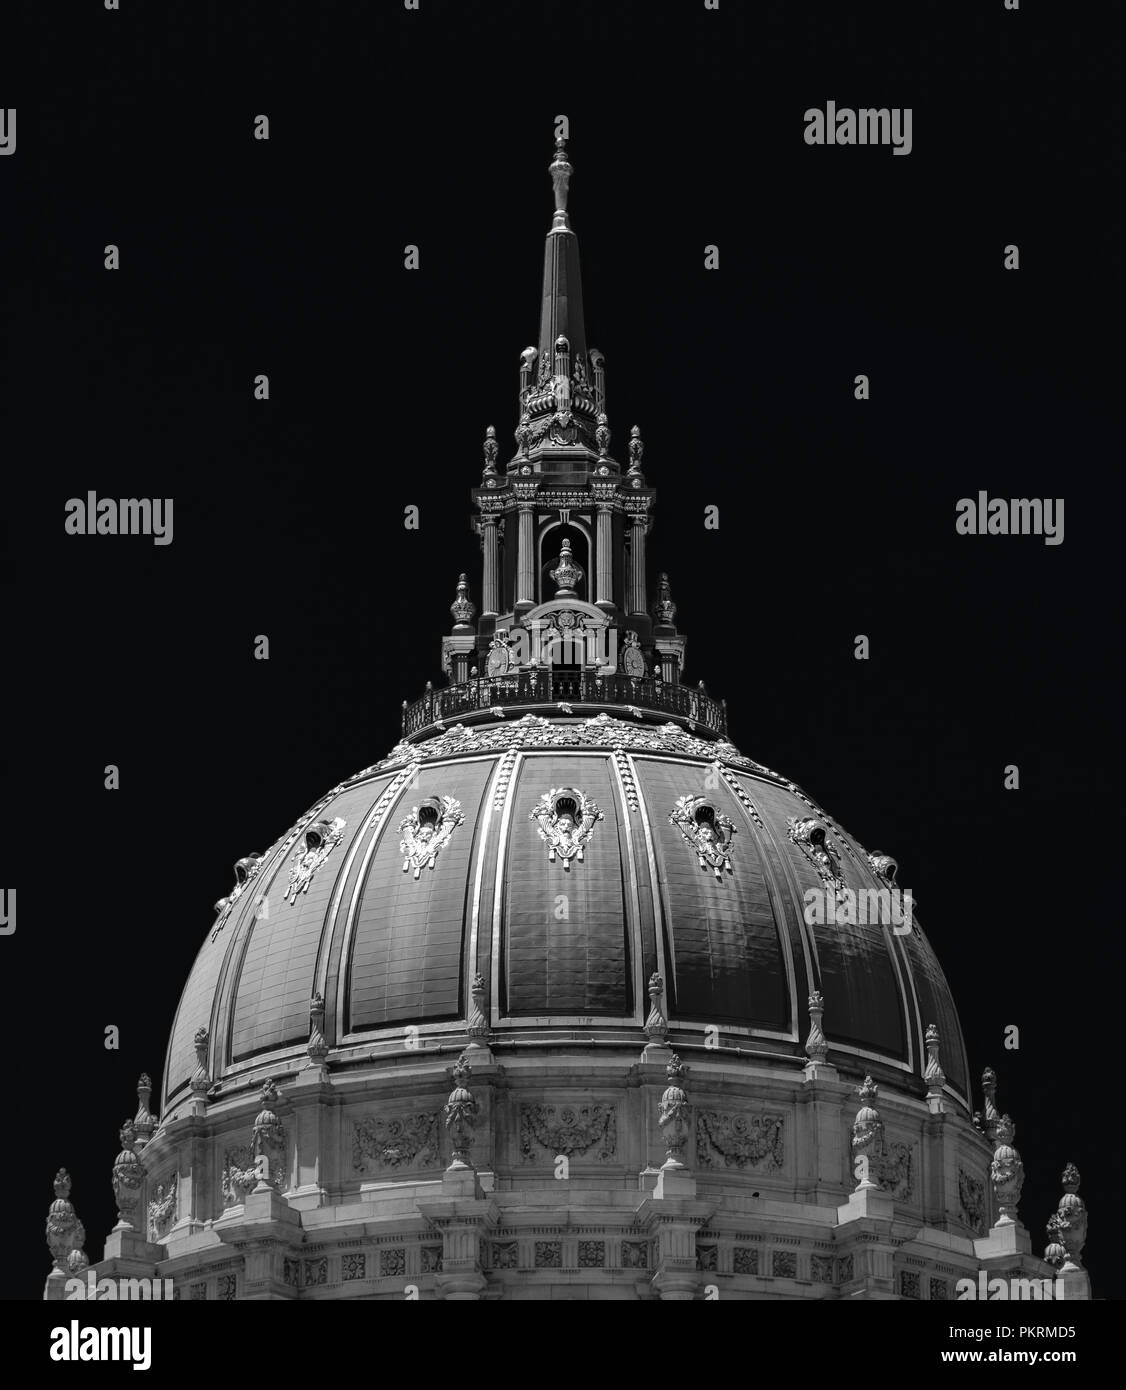 The Amazing Dome Of San Francisco City Hall In Black And White Stock Photo